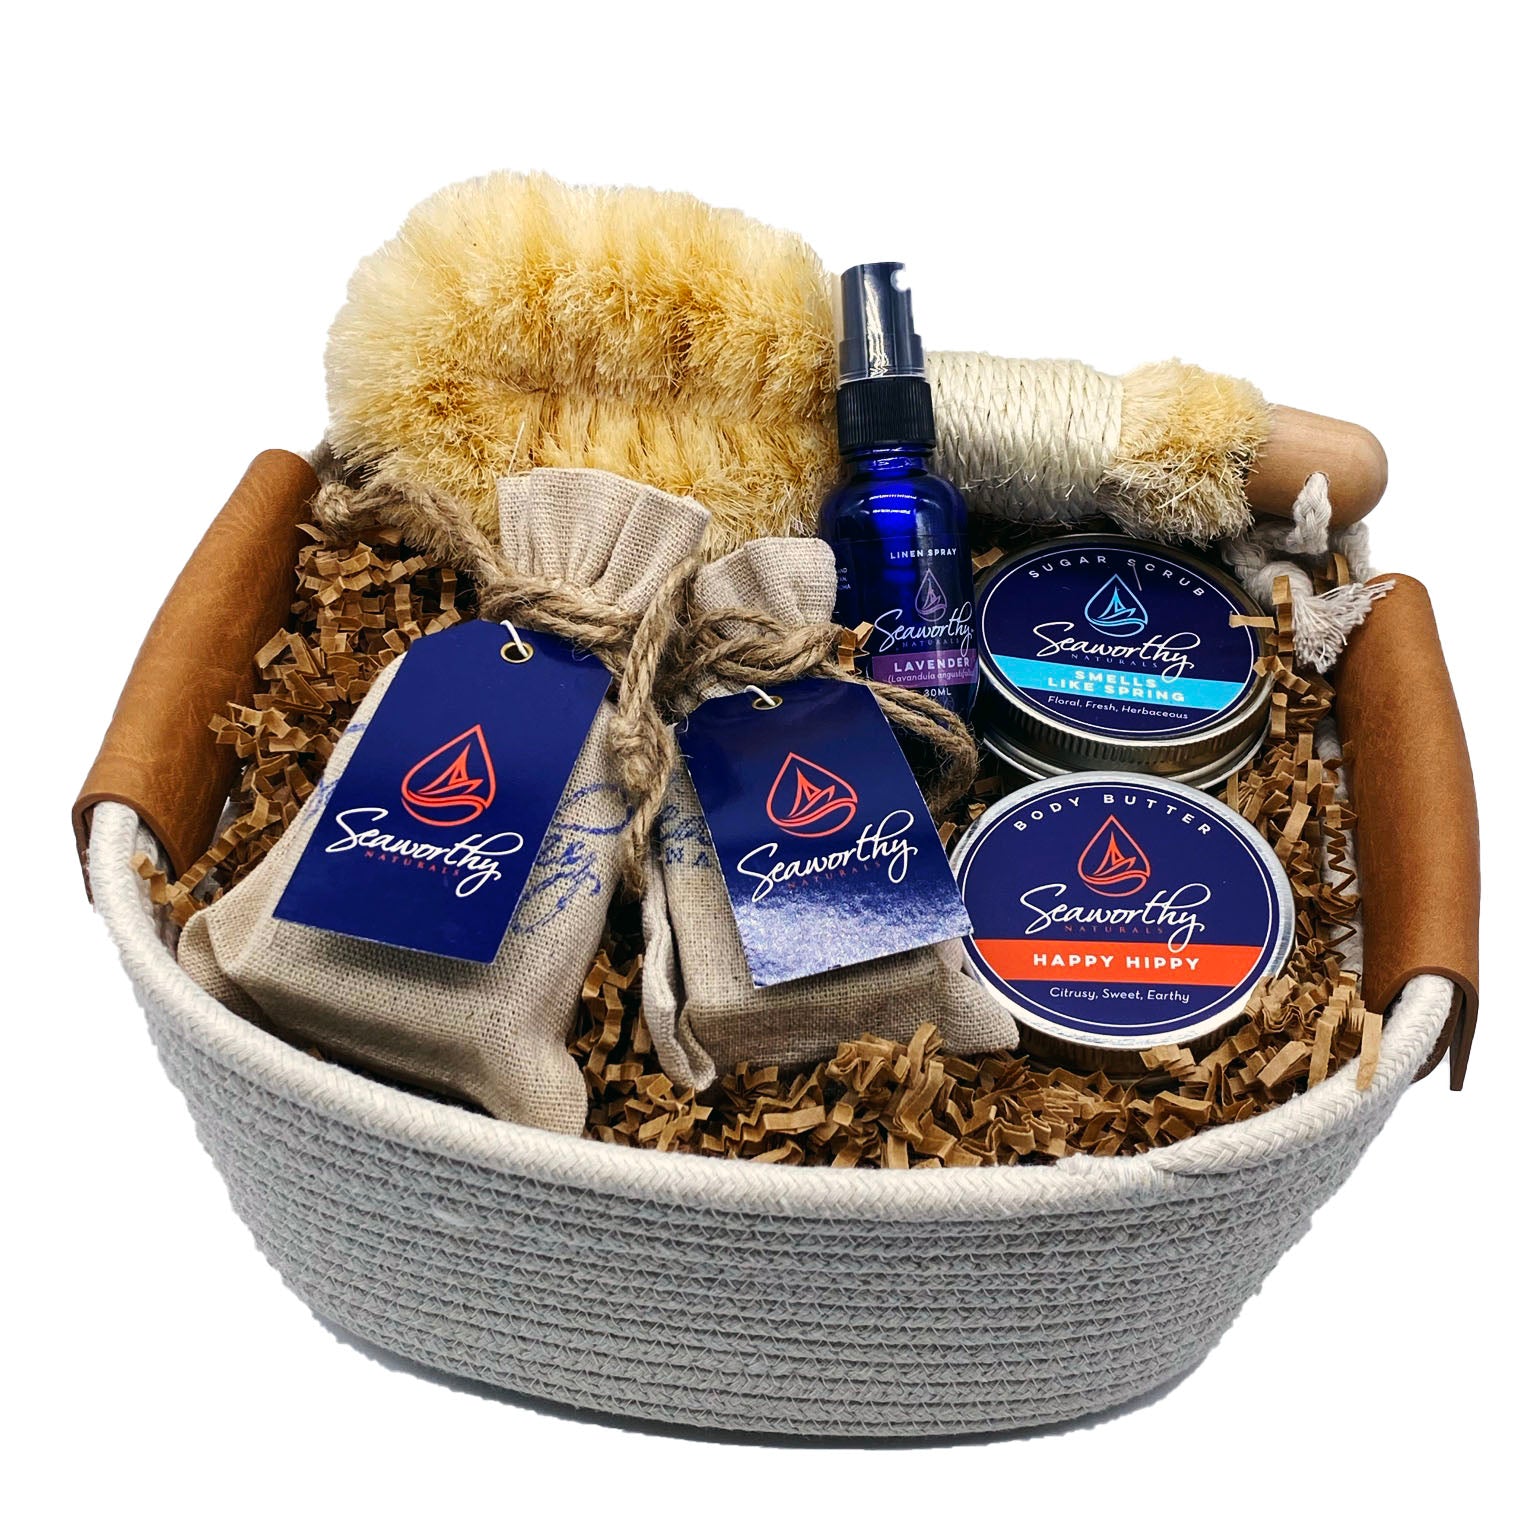 Coiled Rope Spa basket